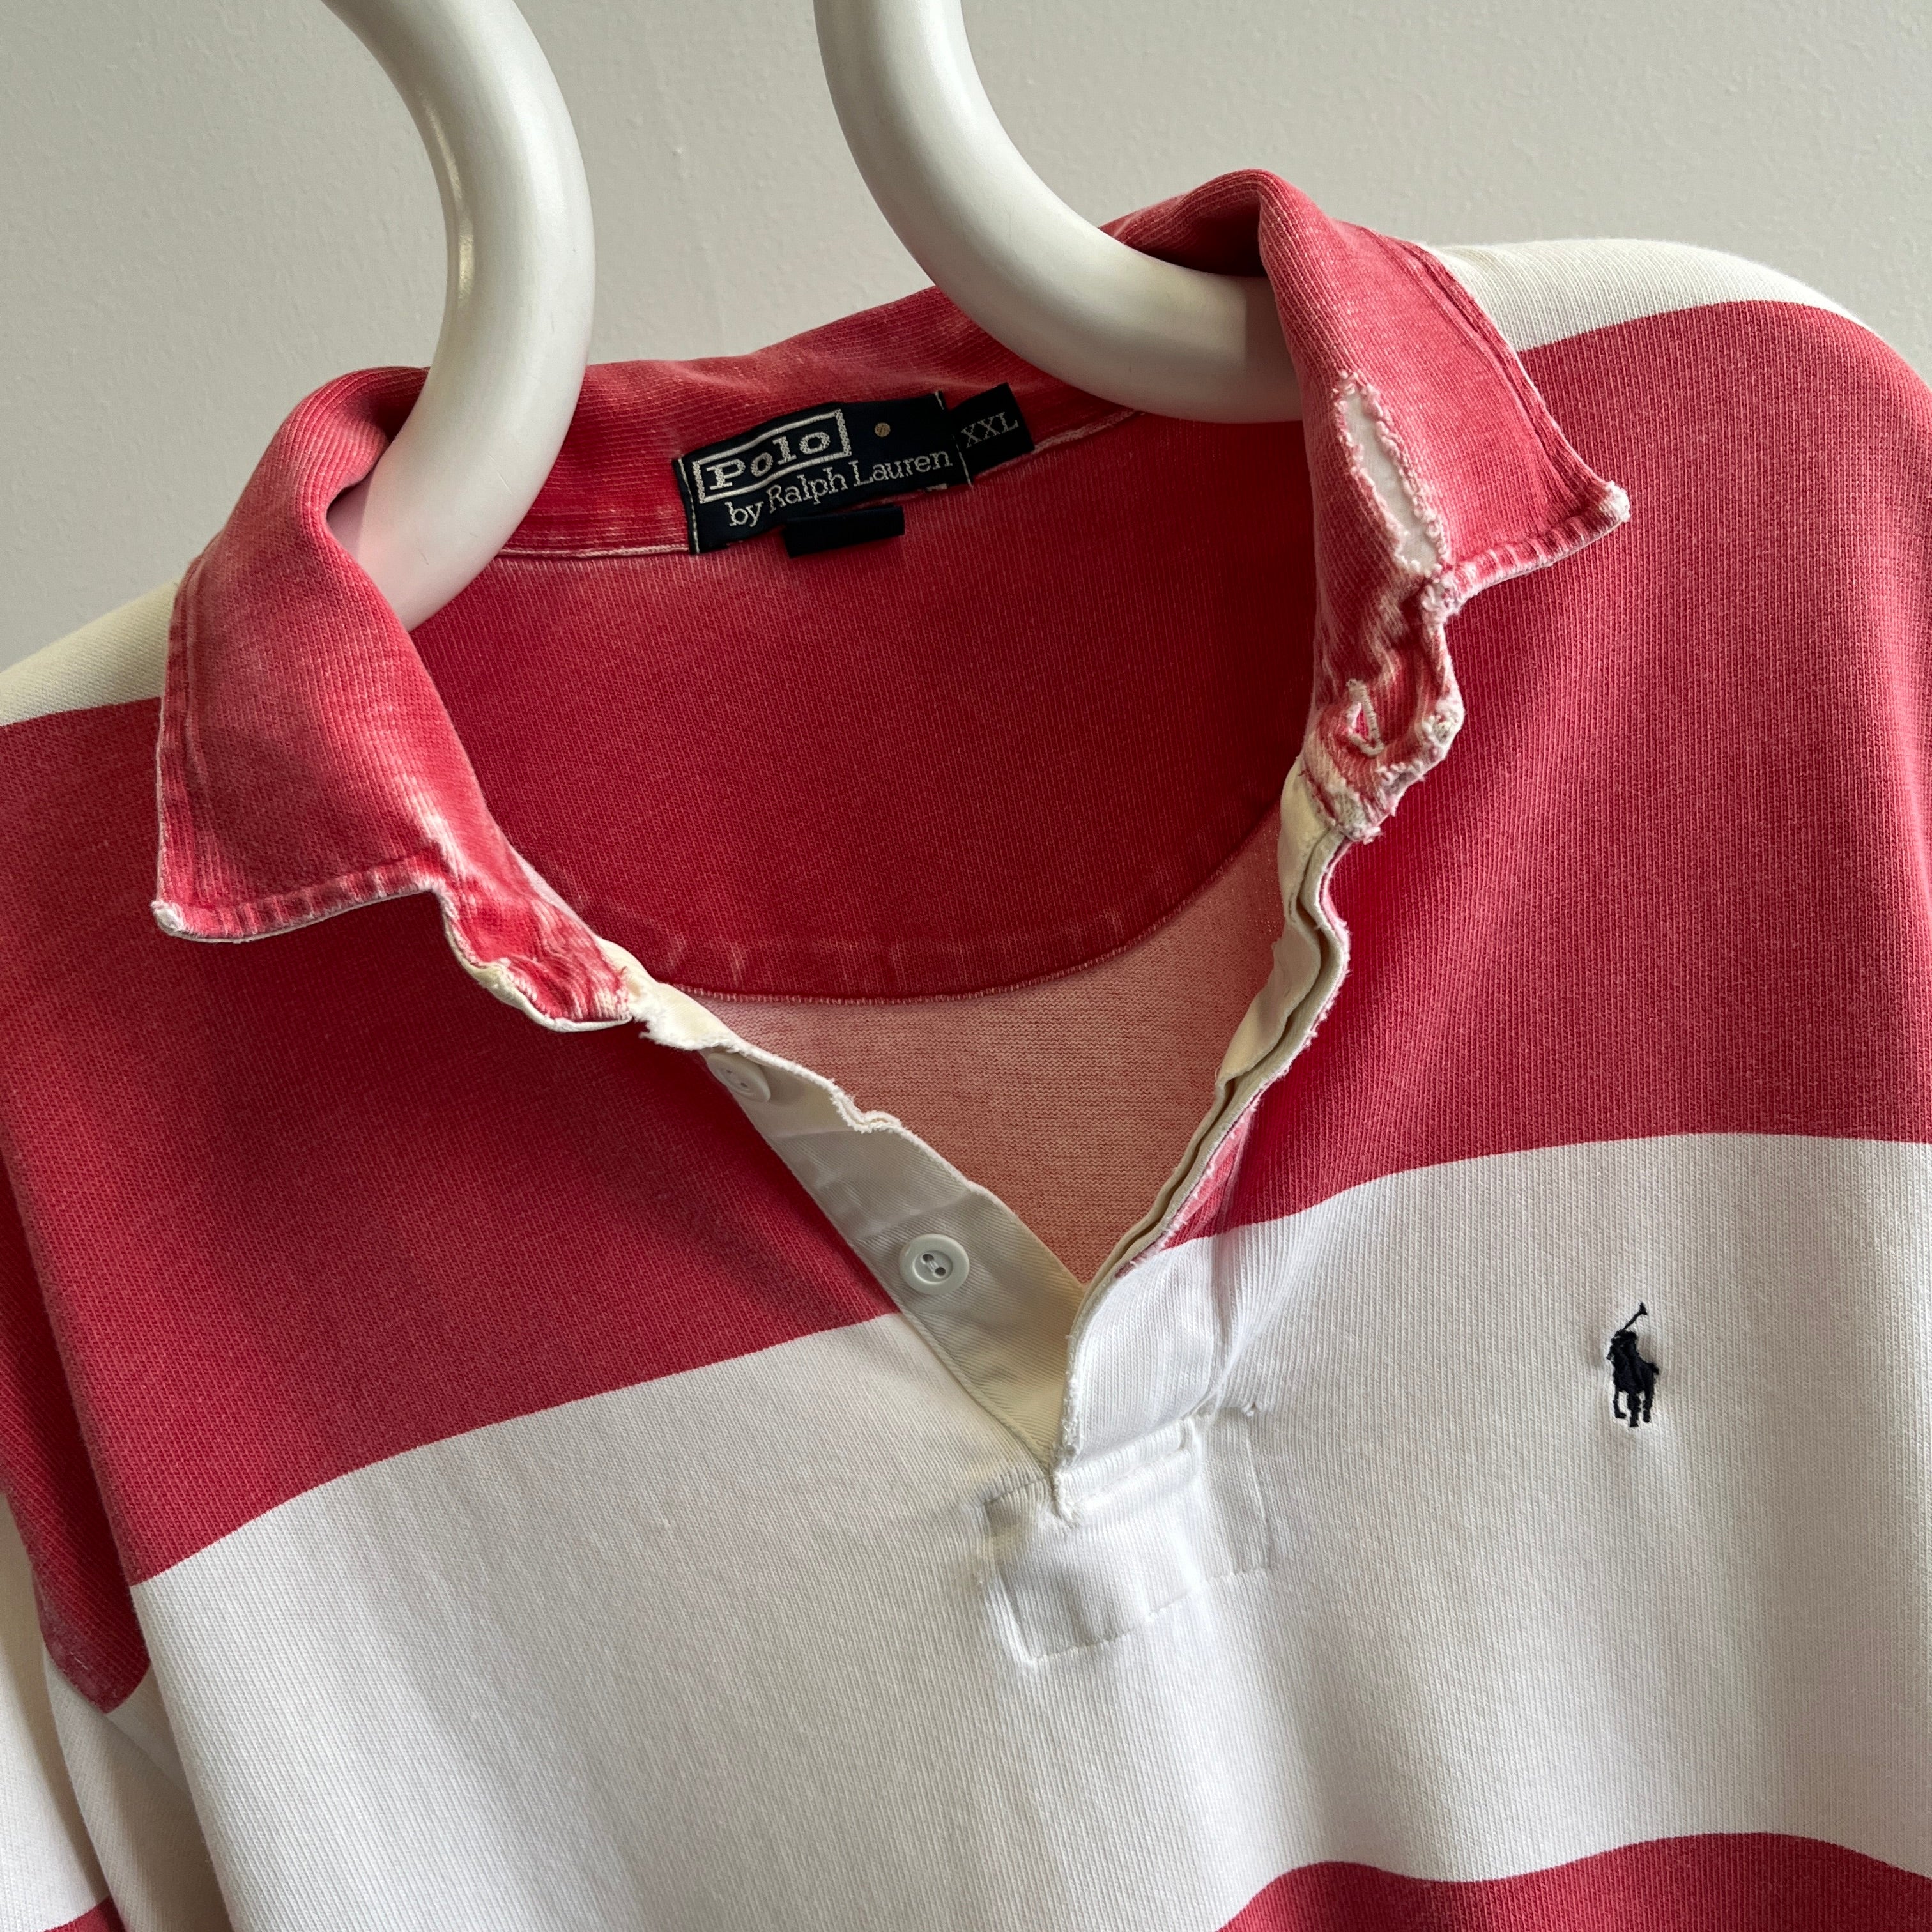 1980s Ralph Lauren Polo Beat Up and Worn Striped Rugby Shirt - !!!